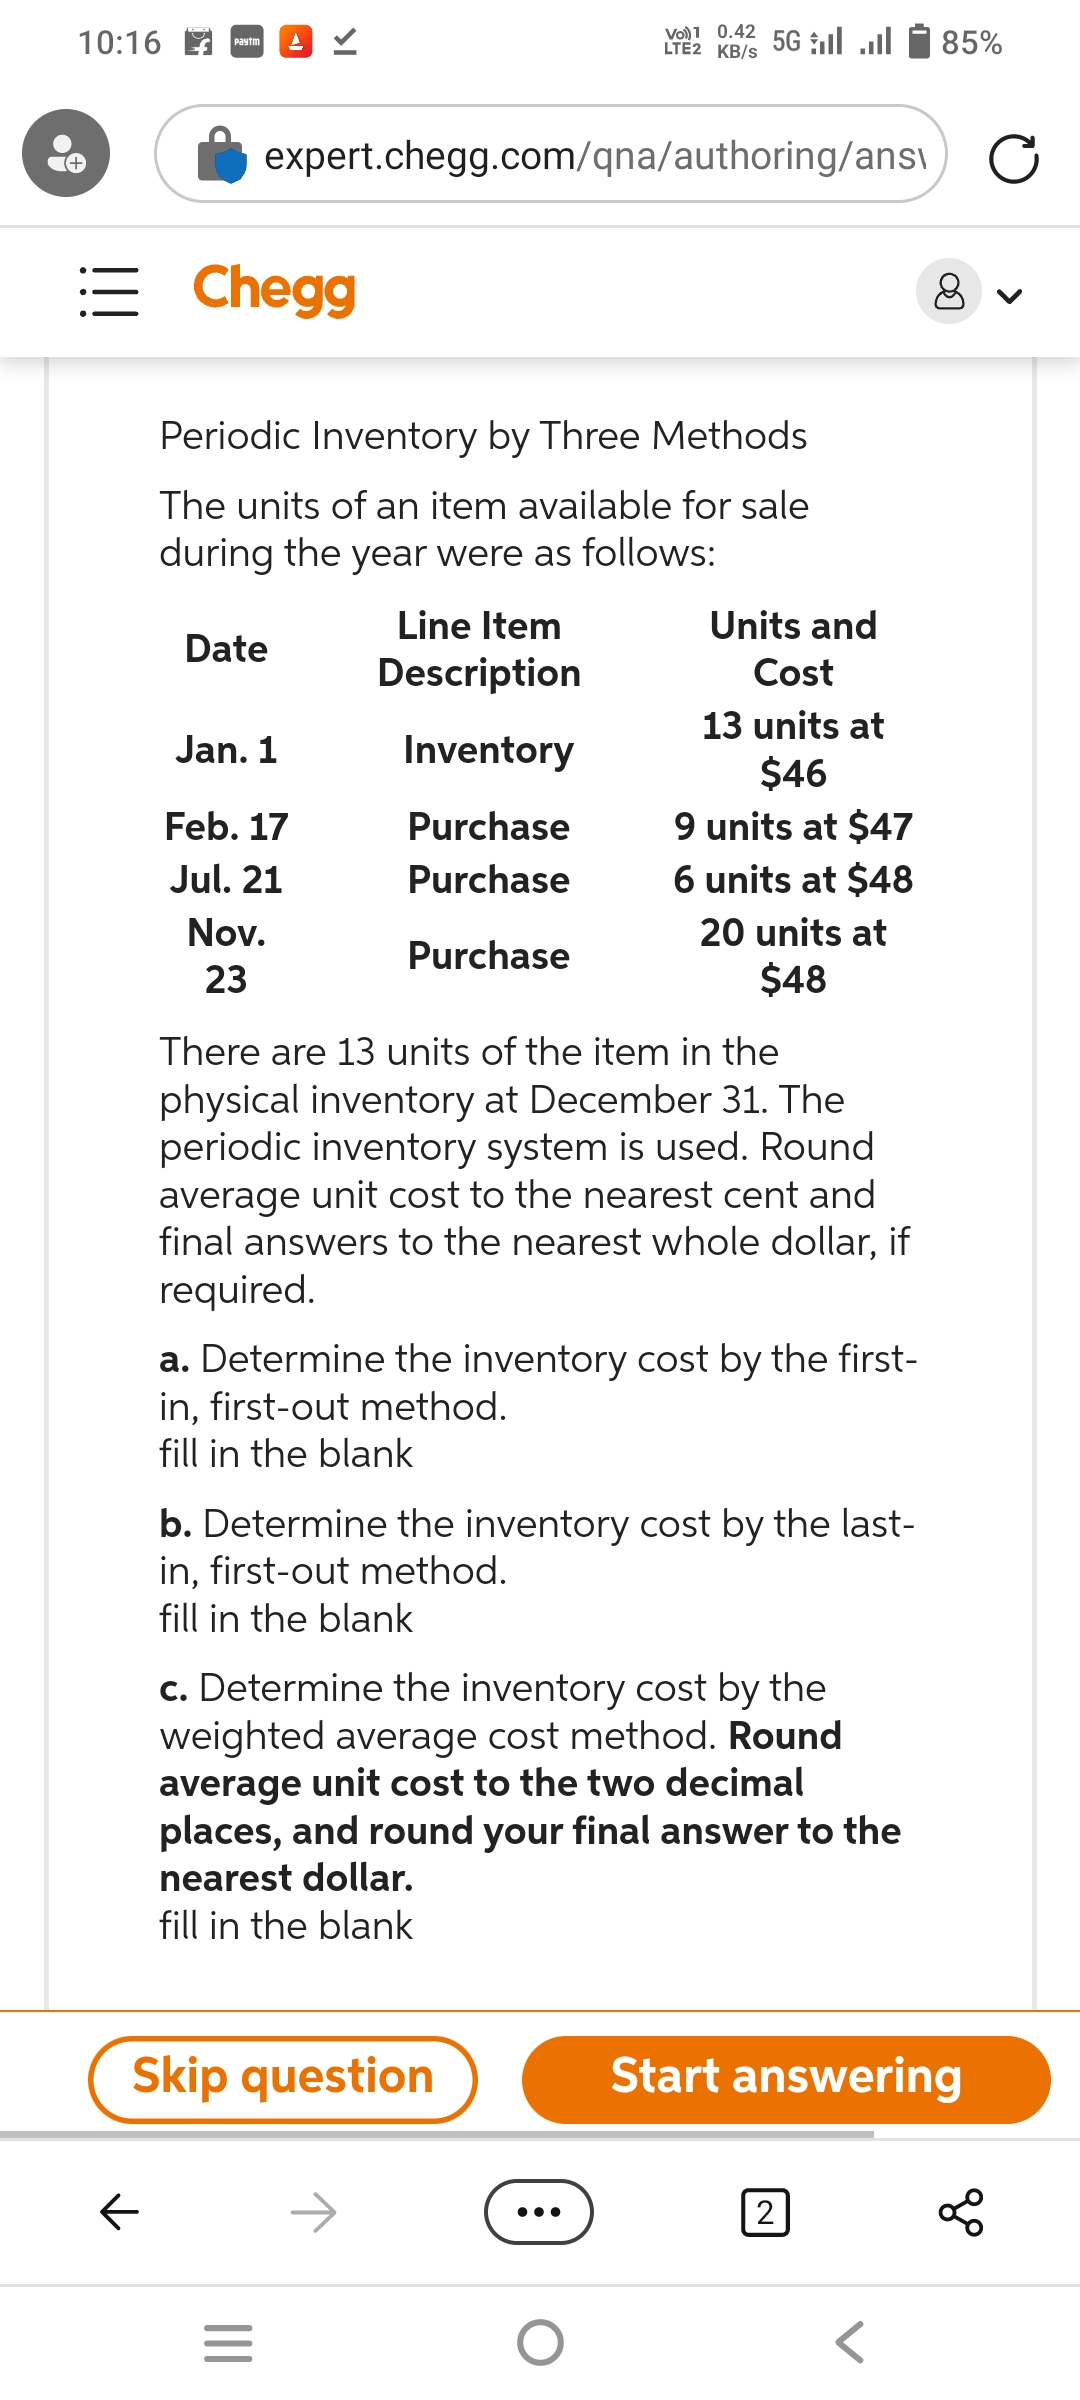 10:16
Paytm AV
←
Chegg
expert.chegg.com/qna/authoring/ans
Periodic Inventory by Three Methods
The units of an item available for sale
during the year were as follows:
Date
Jan. 1
Feb. 17
Jul. 21
Nov.
23
Line Item
Description
Inventory
Purchase
Purchase
Purchase
Vol 0.42 5Gl
LTE2 KB/S
Skip question
|||
There are 13 units of the item in the
physical inventory at December 31. The
periodic inventory system is used. Round
average unit cost to the nearest cent and
final answers to the nearest whole dollar, if
required.
=
Units and
Cost
13 units at
$46
a. Determine the inventory cost by the first-
in, first-out method.
fill in the blank
9 units at $47
6 units at $48
b. Determine the inventory cost by the last-
in, first-out method.
fill in the blank
20 units at
$48
c. Determine the inventory cost by the
weighted average cost method. Round
average unit cost to the two decimal
places, and round your final answer to the
nearest dollar.
fill in the blank
O
85%
2
8
Start answering
go
<